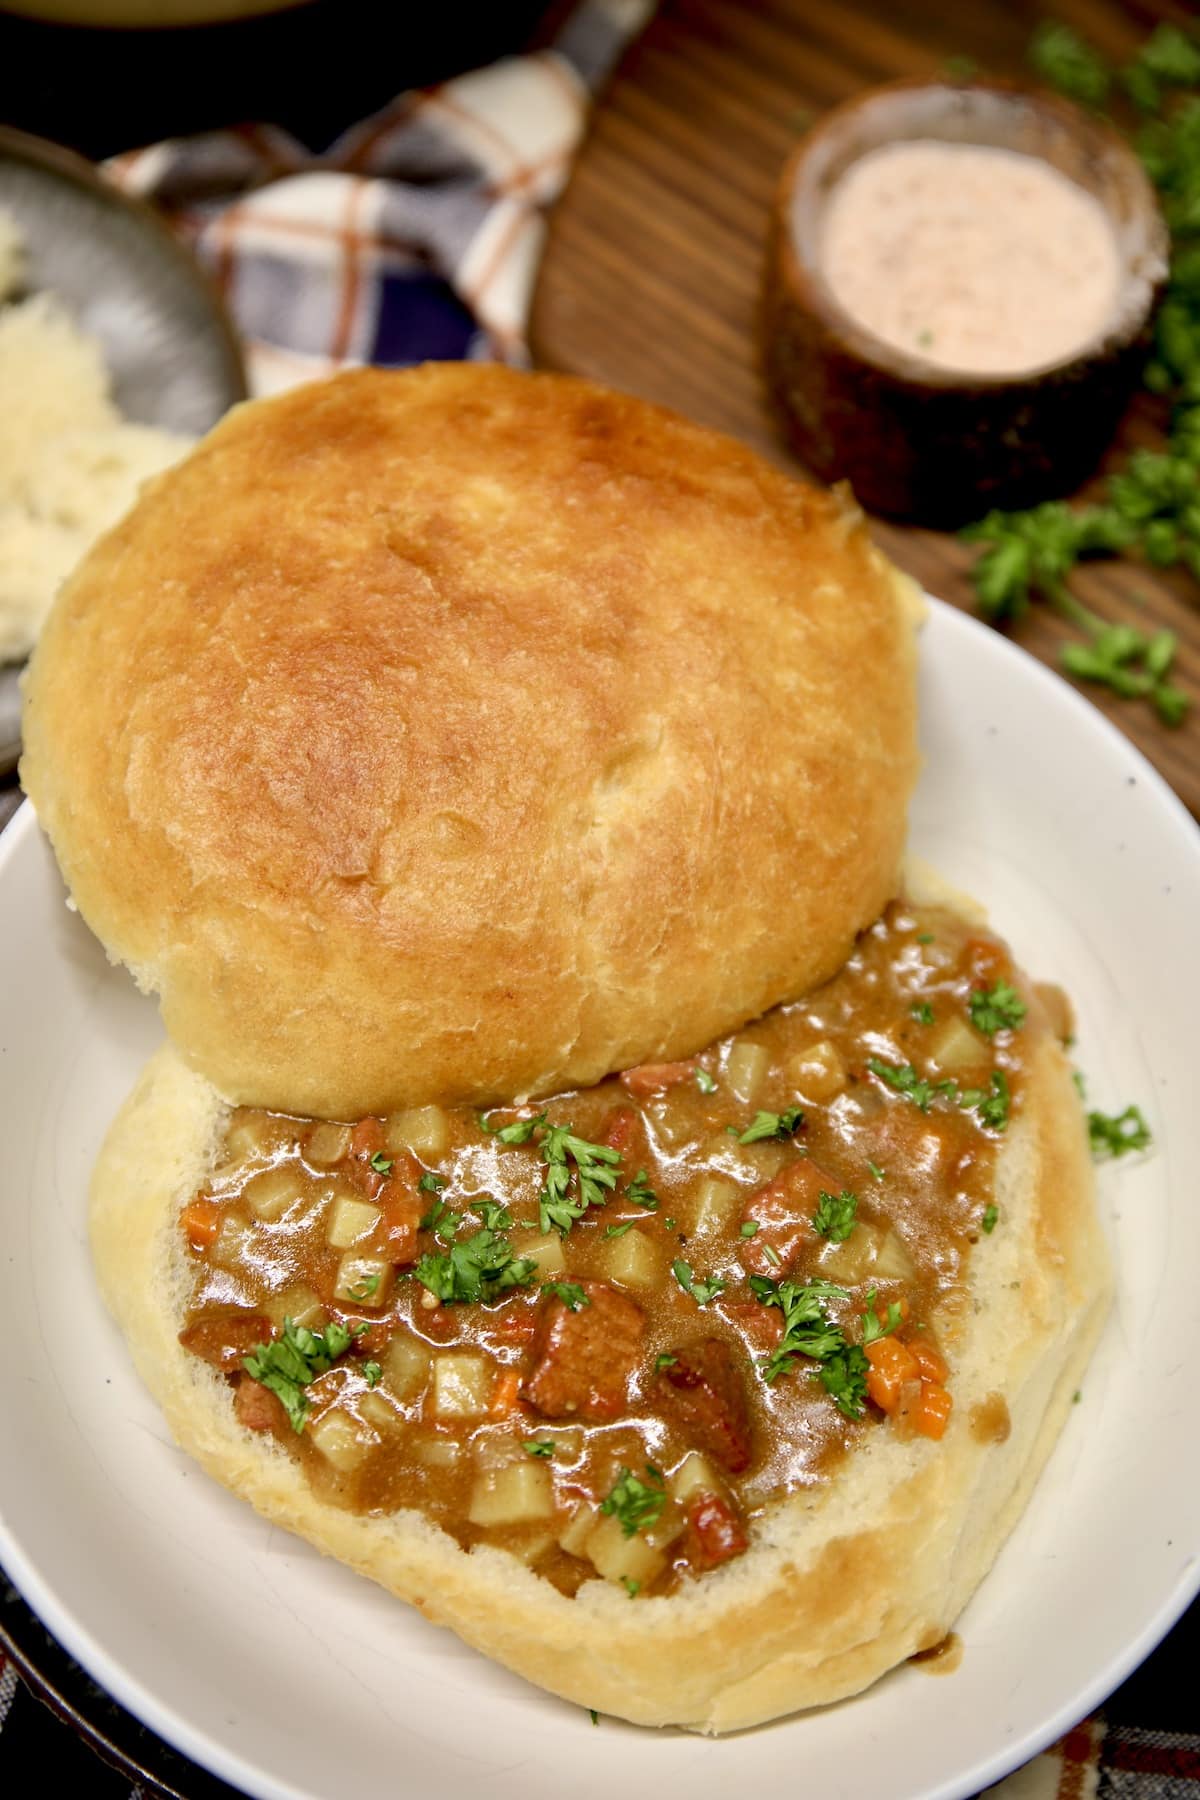 Bread bowl filled with beef and vegetable stew.